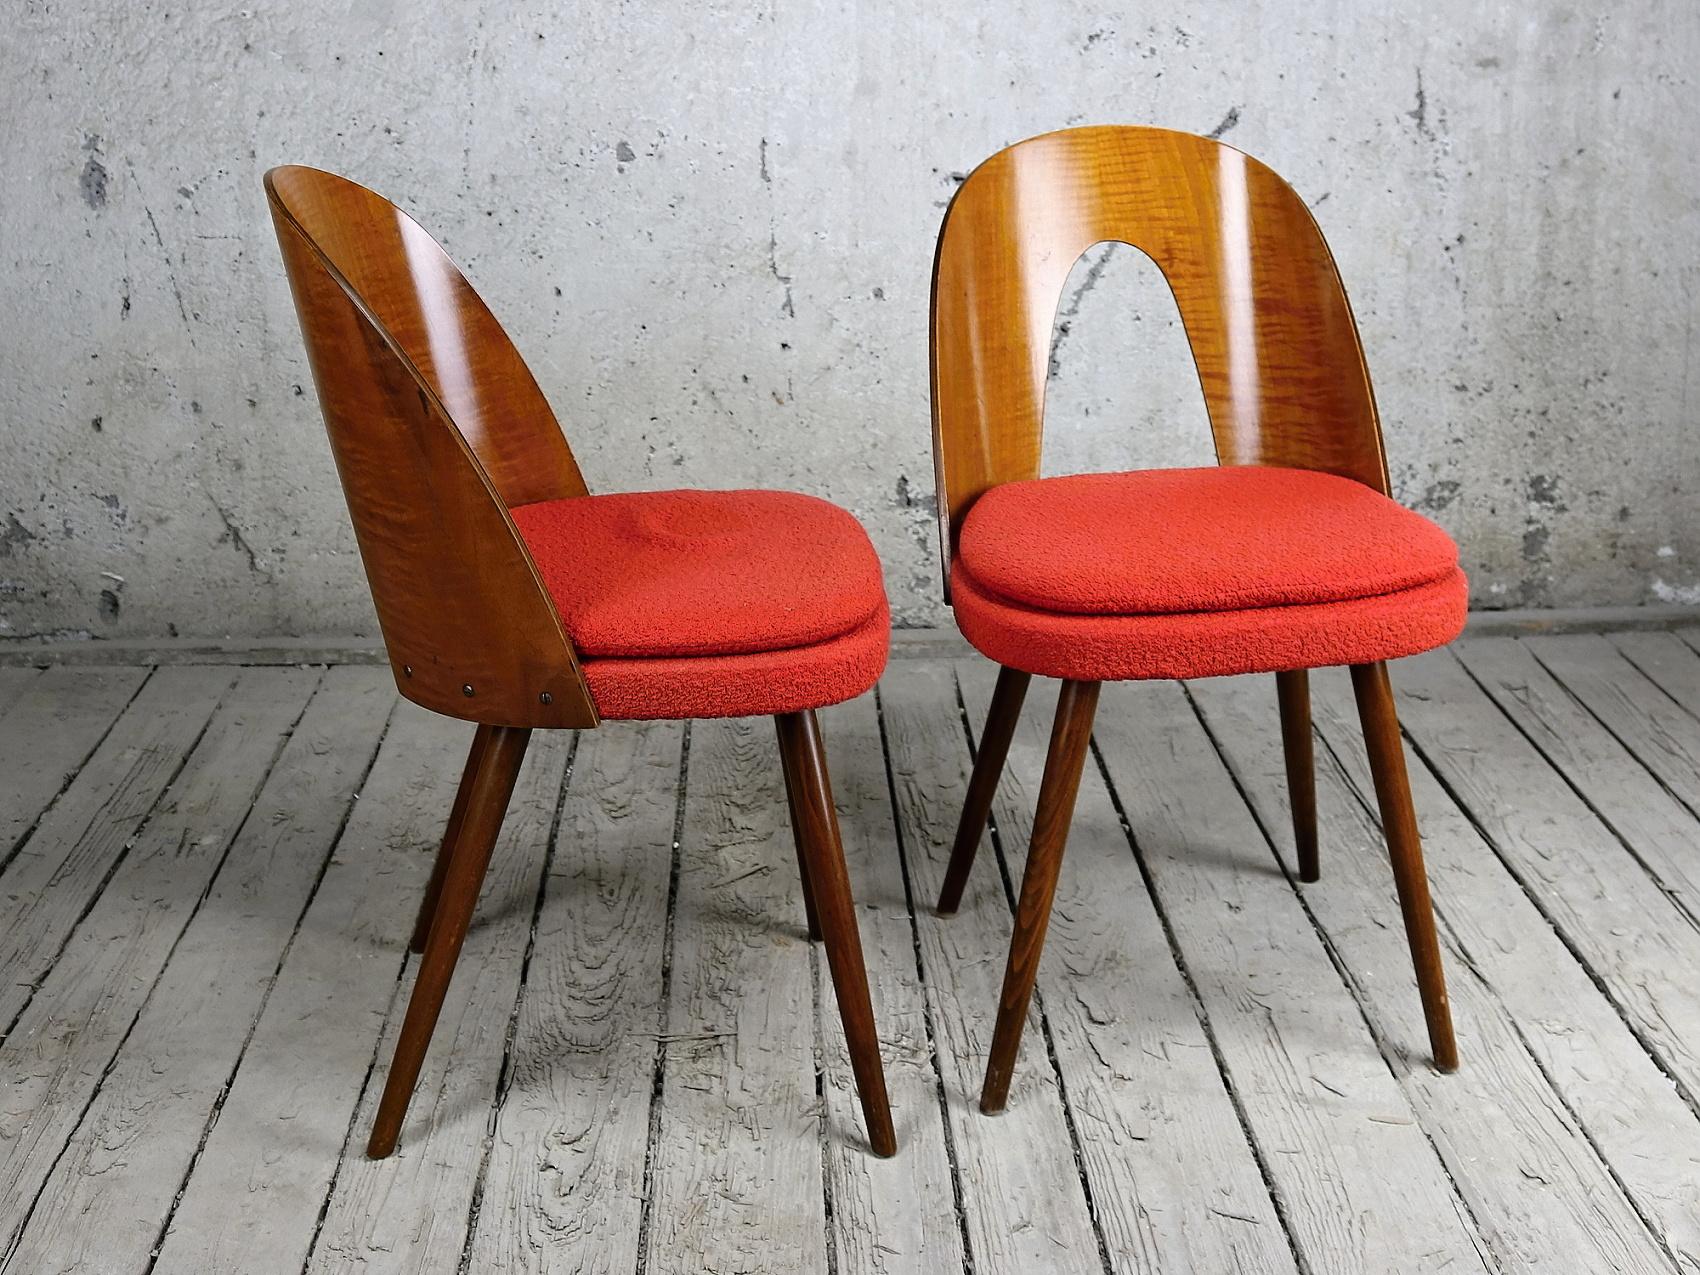 These chairs were designed by Antonin Suman, and were manufactured by the Tatra Nabytok Company, in the 1960s, in Czechoslovakia. Their red original fabric is still in good condition.